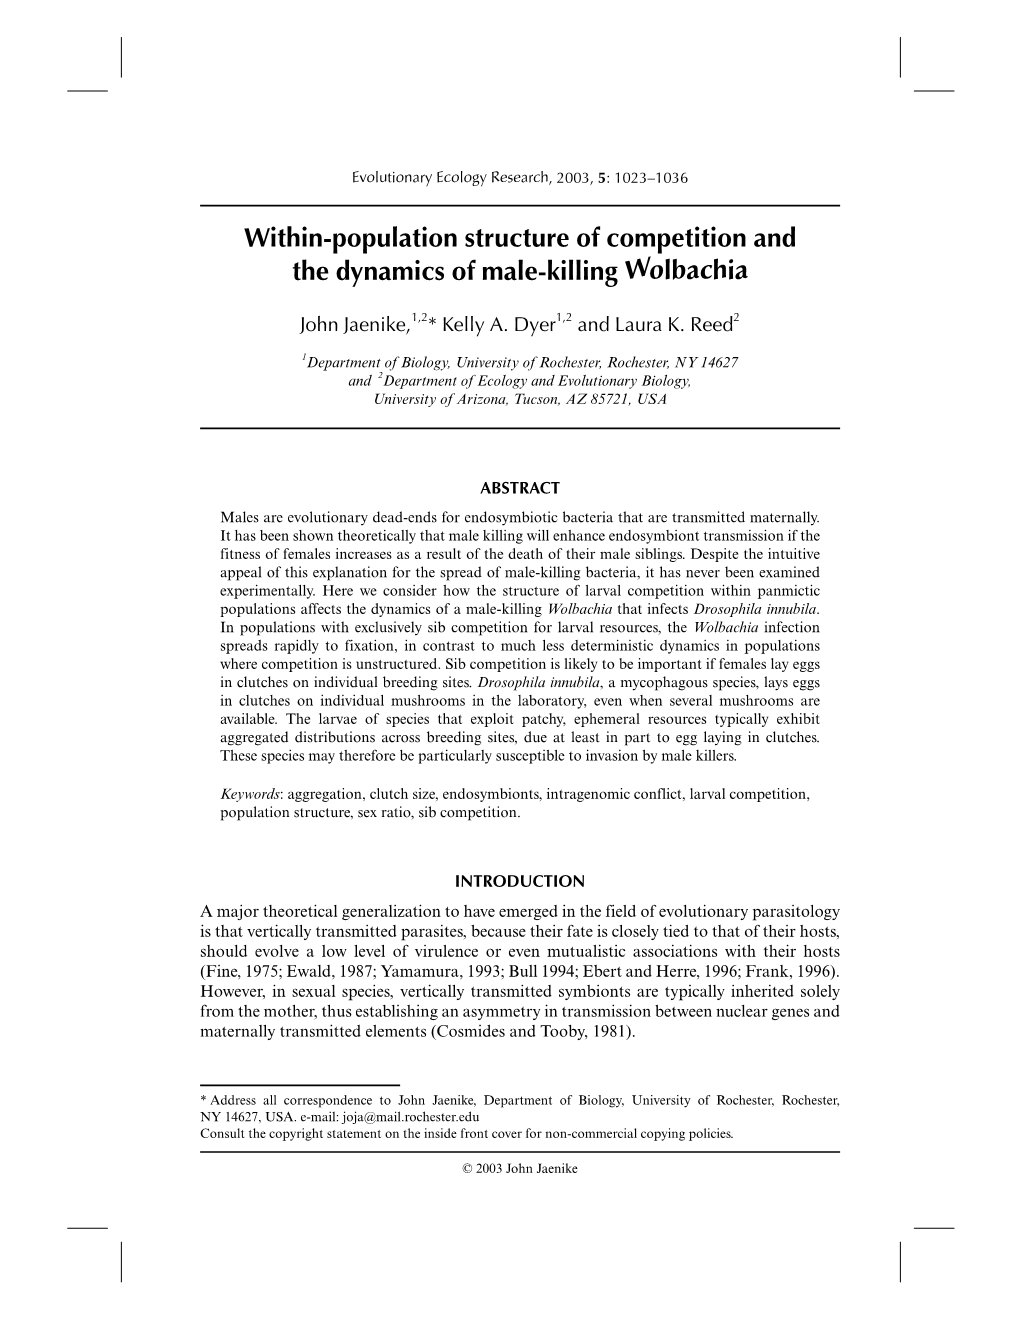 Within-Population Structure of Competition and the Dynamics of Male-Killing Wolbachia